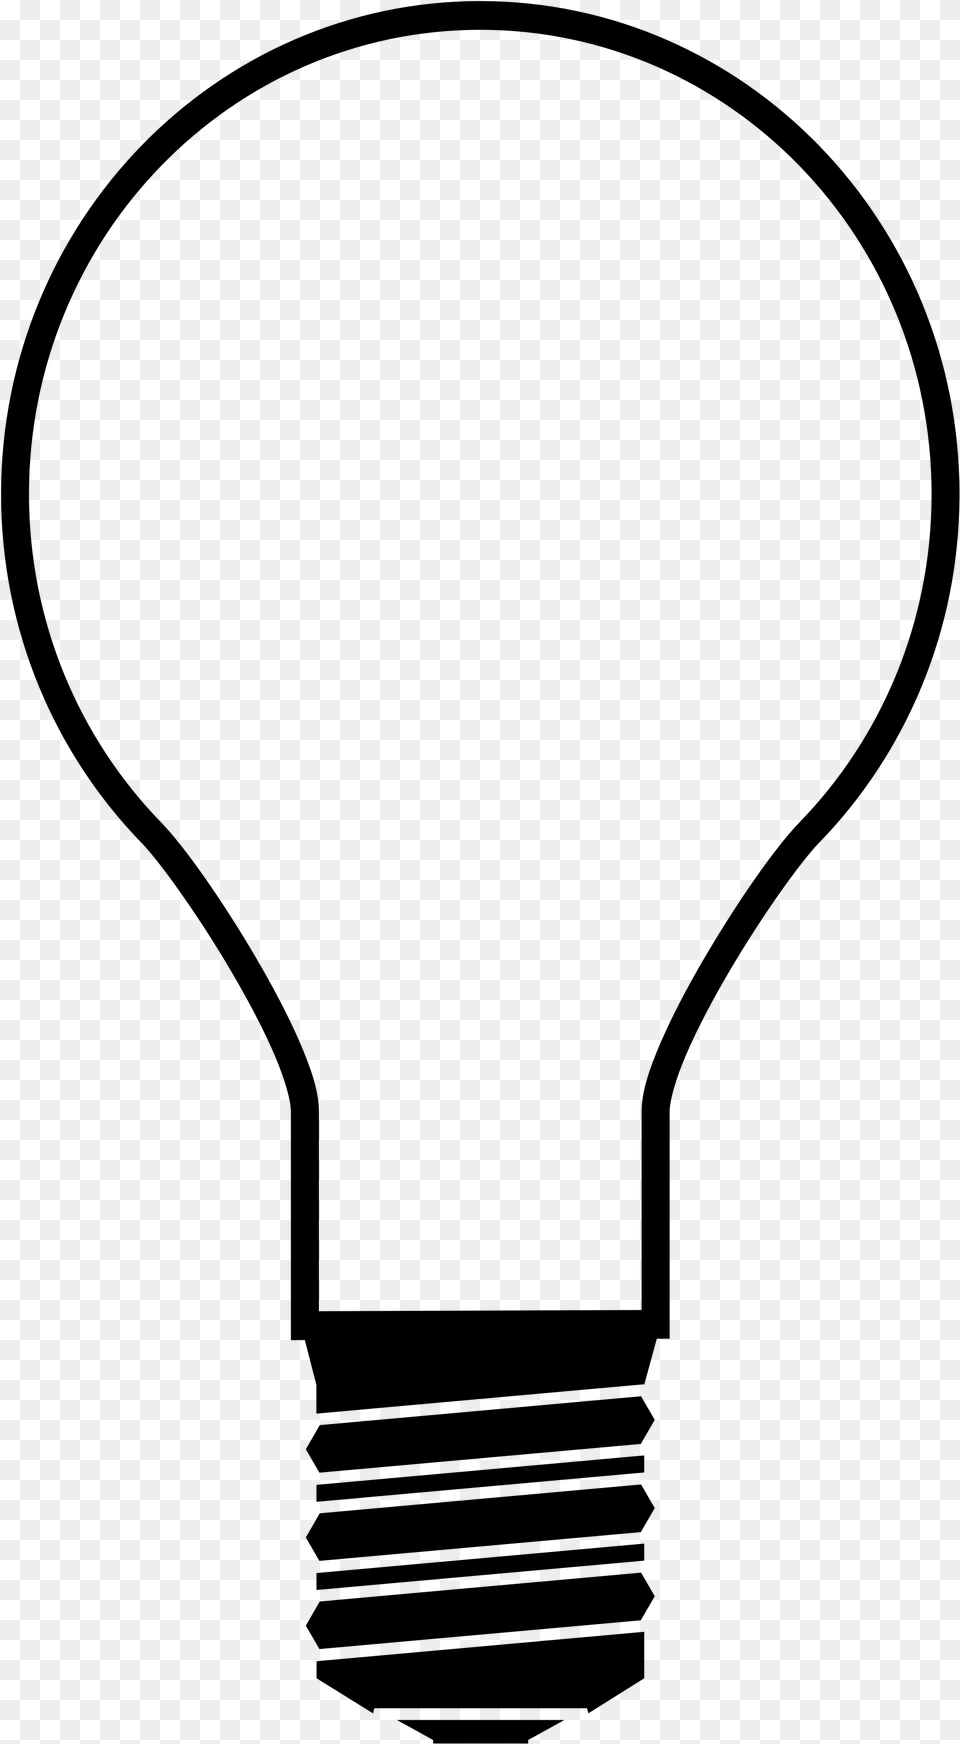 Christmas Light Bulb Silhouette At Getdrawings Light Bulb Silhouette, Gray Free Png